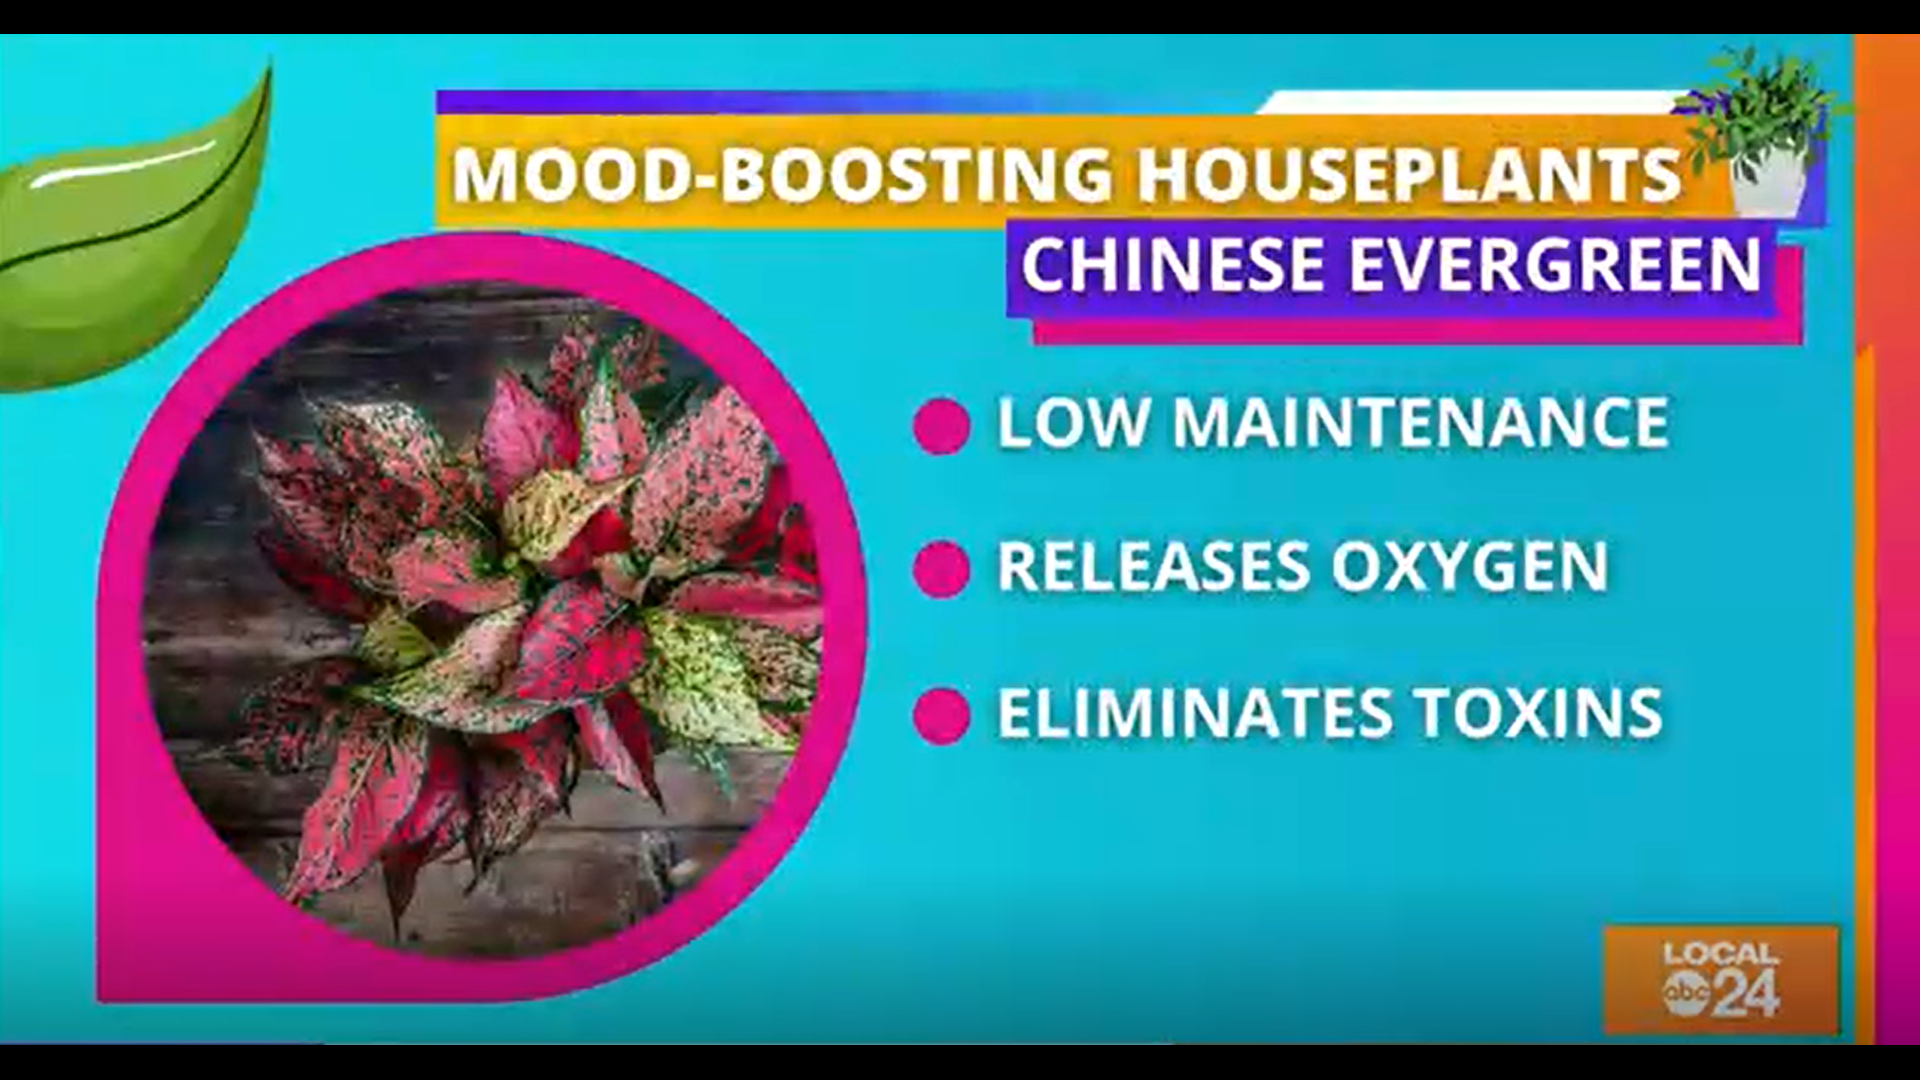 Join Sydney Neely on this week's "The Shortcut" as we check out 4 houseplants known to boost one's mood and possibly immune system. :)